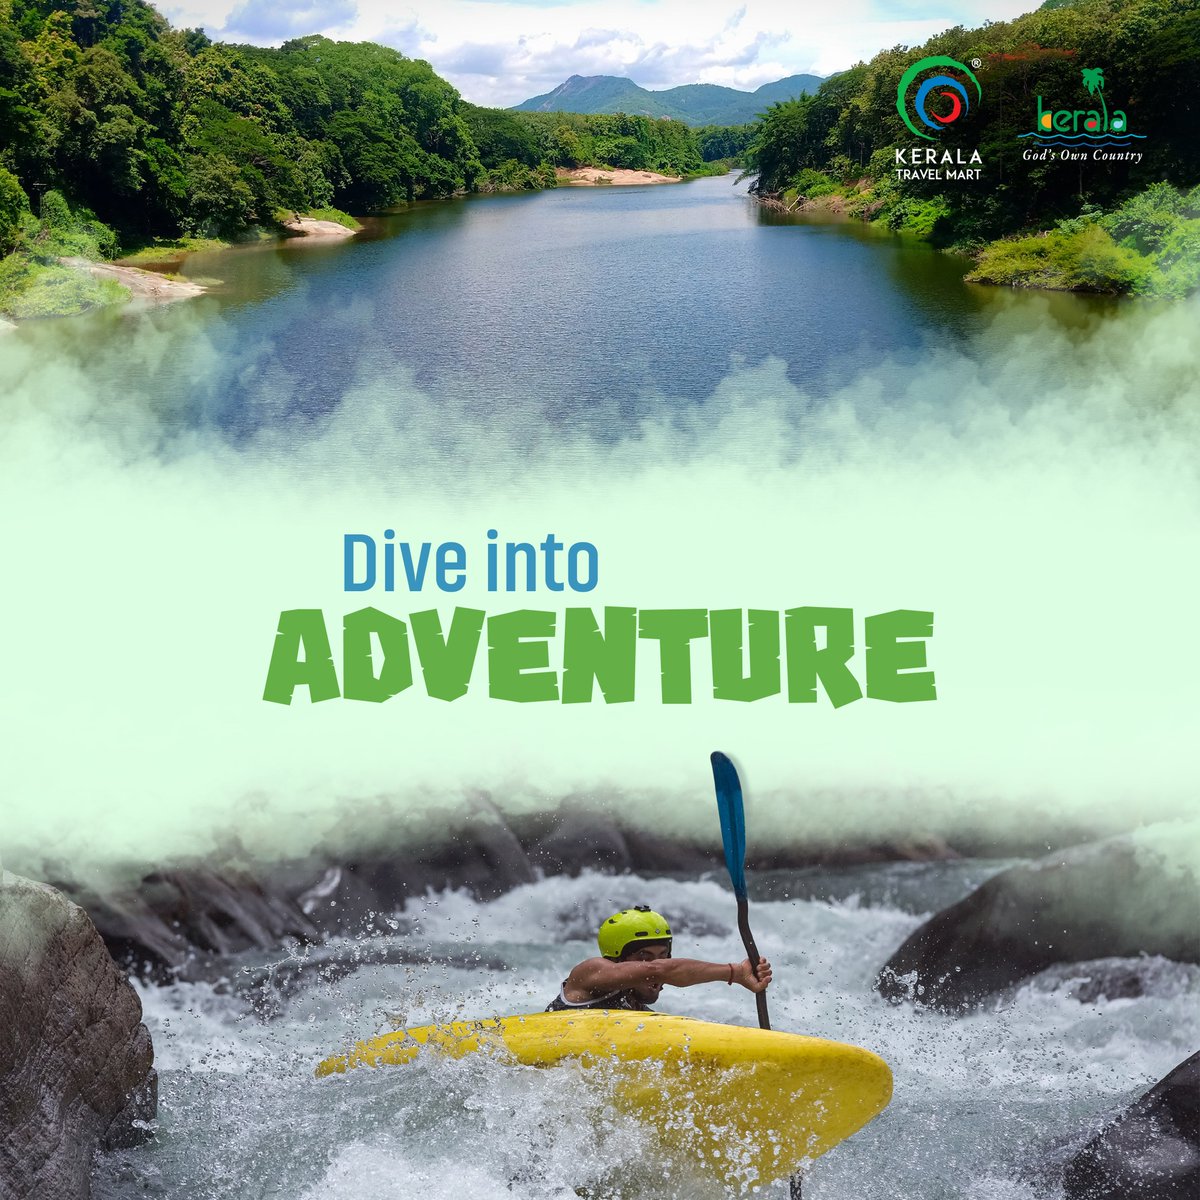 The Chaliyar River in Kozhikode becomes a zone for high-intensity action and adventure every monsoon. As the rain-fed river tumbles its way through rocks, kayaking and white river rafting enthusiasts come here to challenge its might.

#KeralaTravelMart #B2B #KTM #AdventureSports